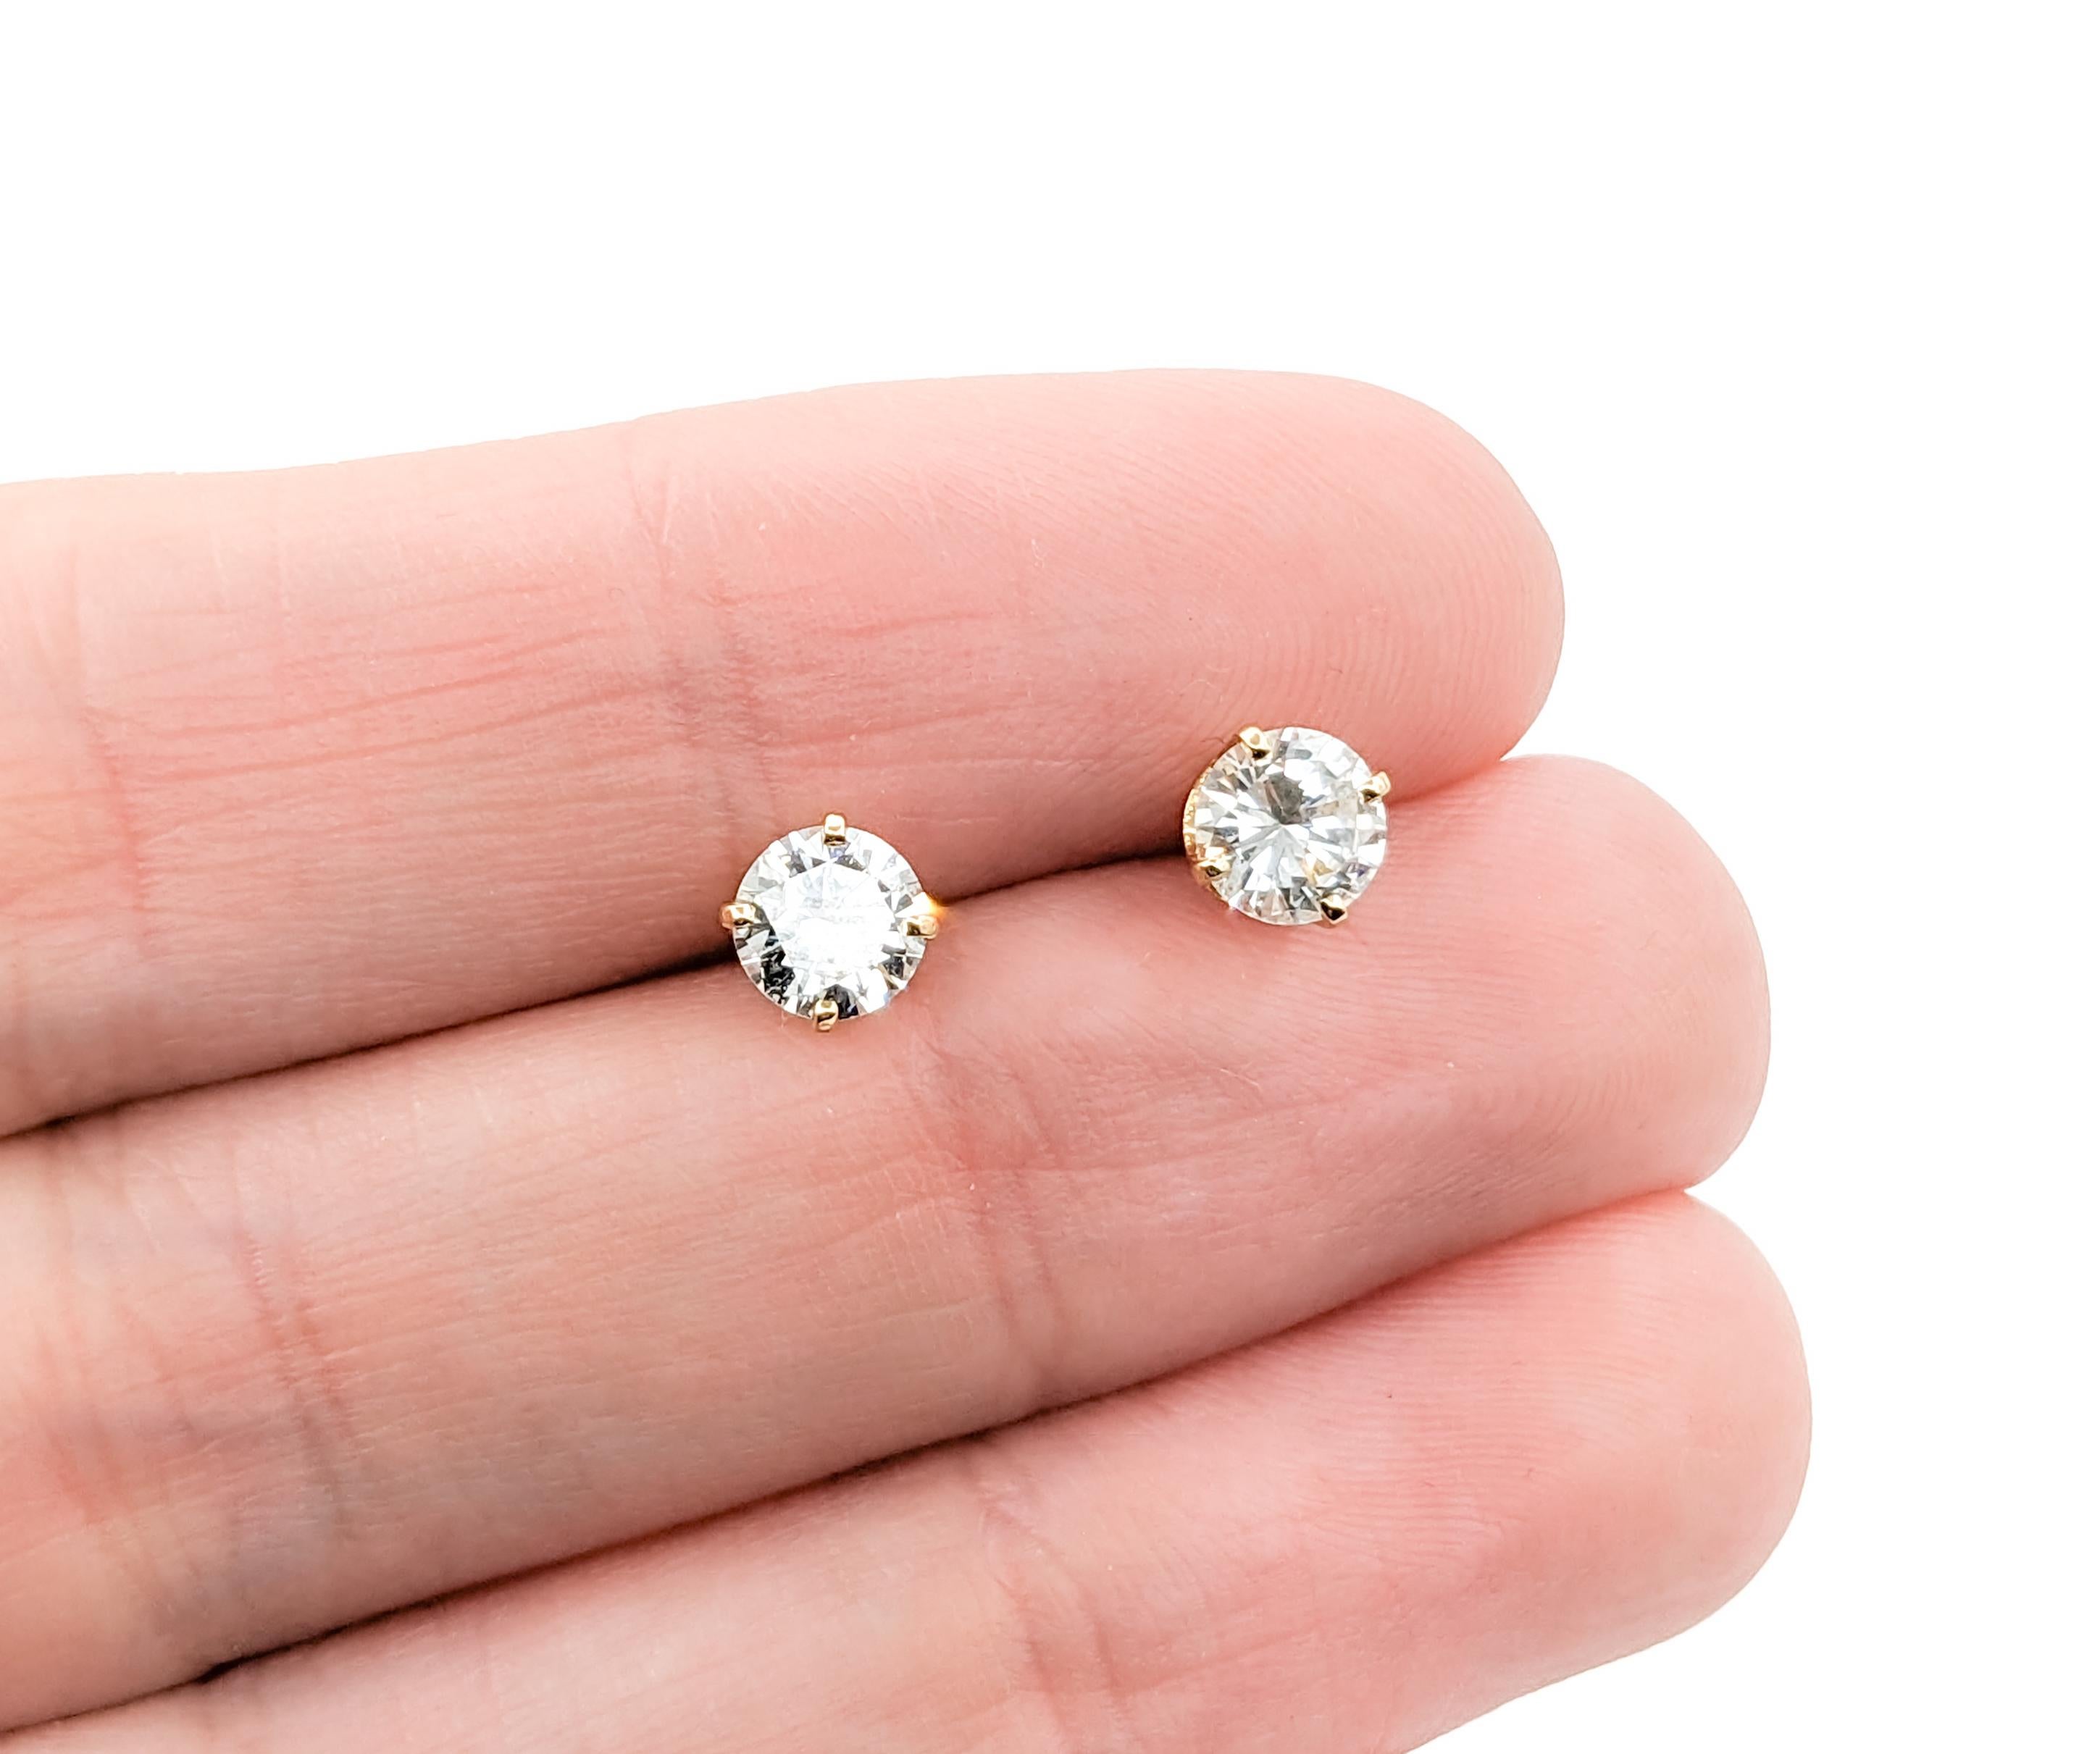 1ctw Diamond Stud Earrings In Yellow Gold In Excellent Condition For Sale In Bloomington, MN